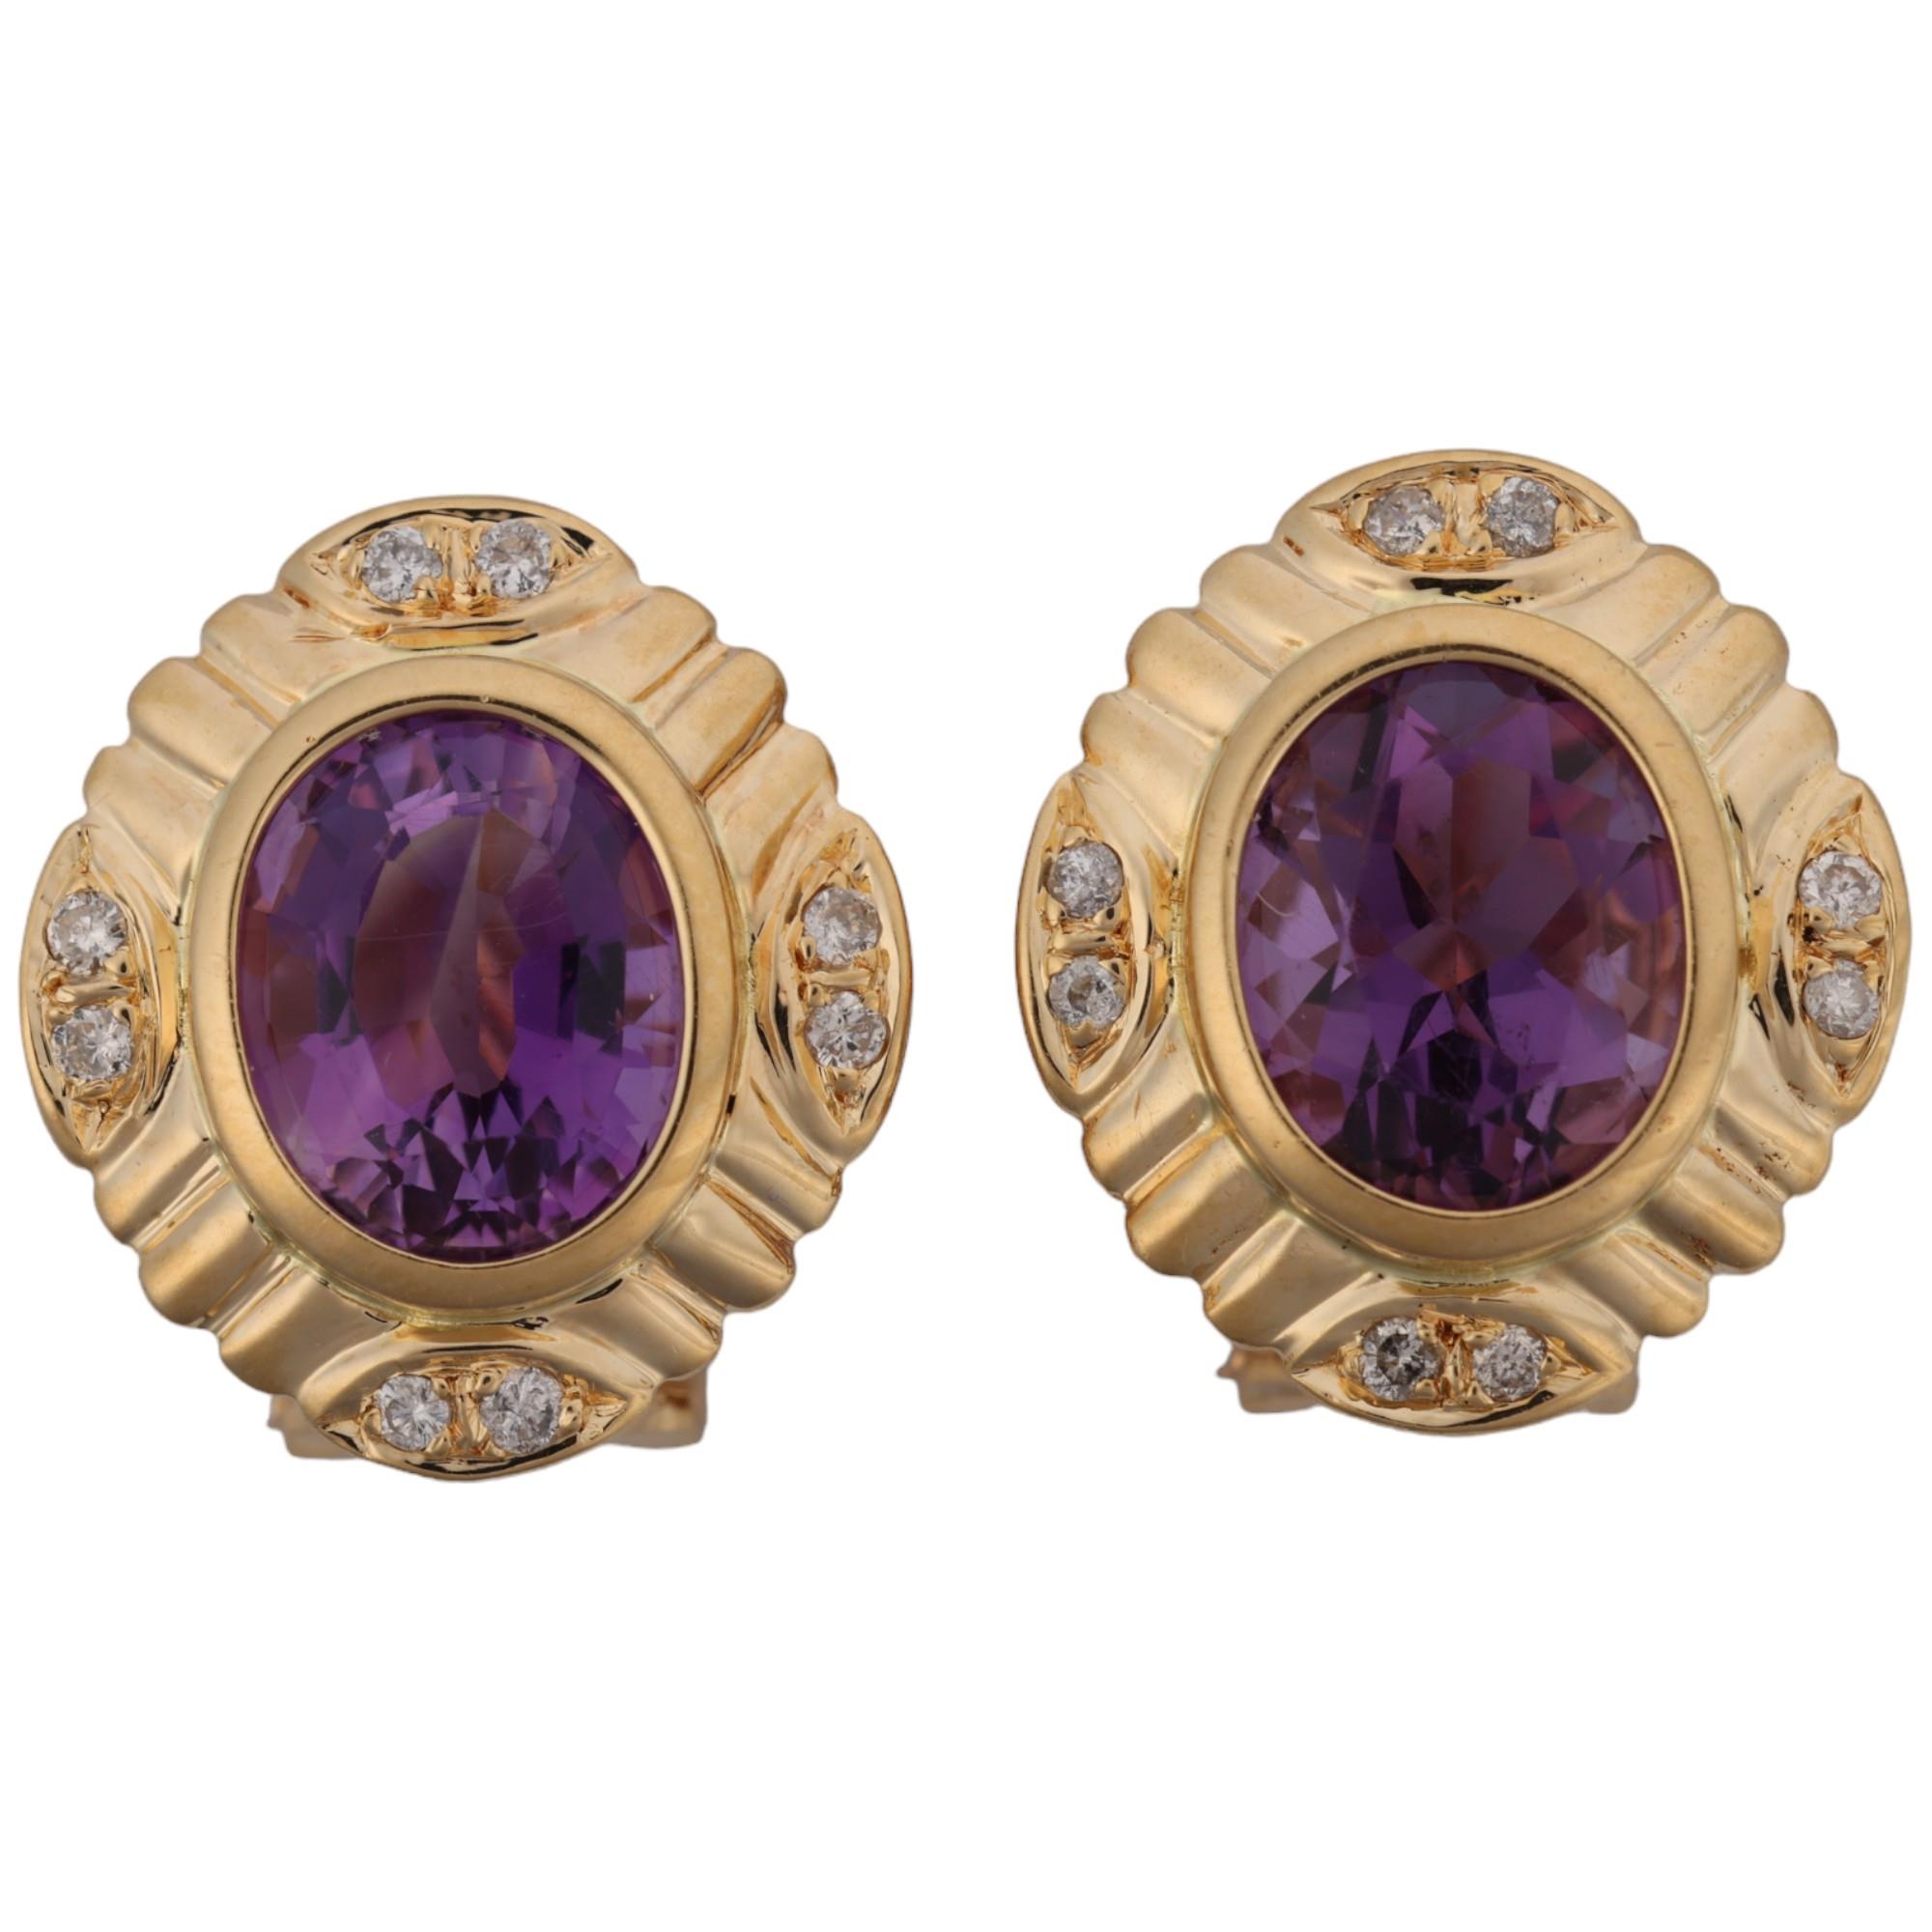 A pair of Italian 18ct gold amethyst and diamond earrings, rub-over set with oval mixed-cut